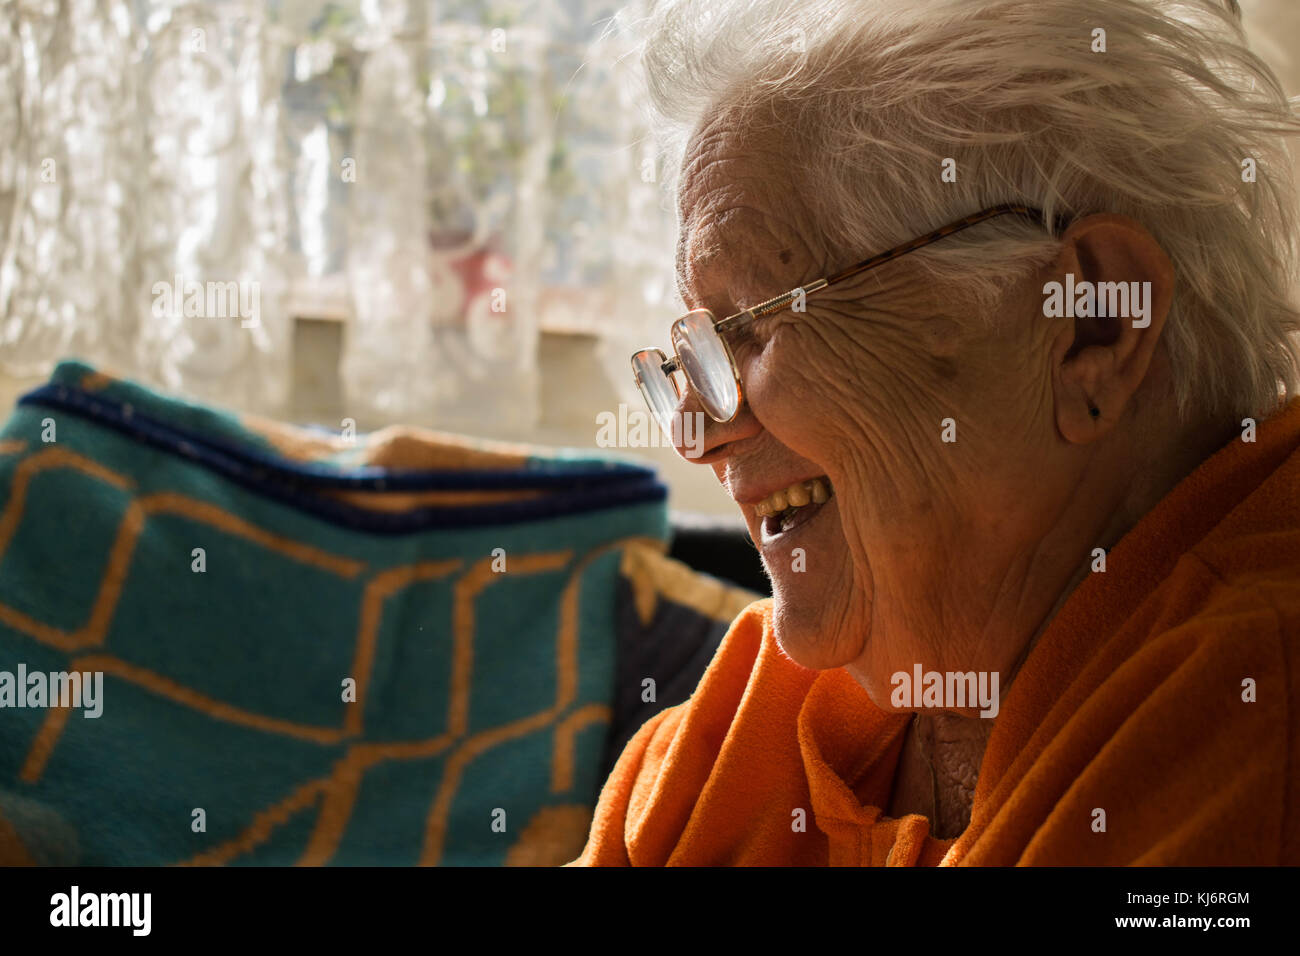 Women who survived so much in her life and still smilling and looking forward to life. Storyteller. Stock Photo